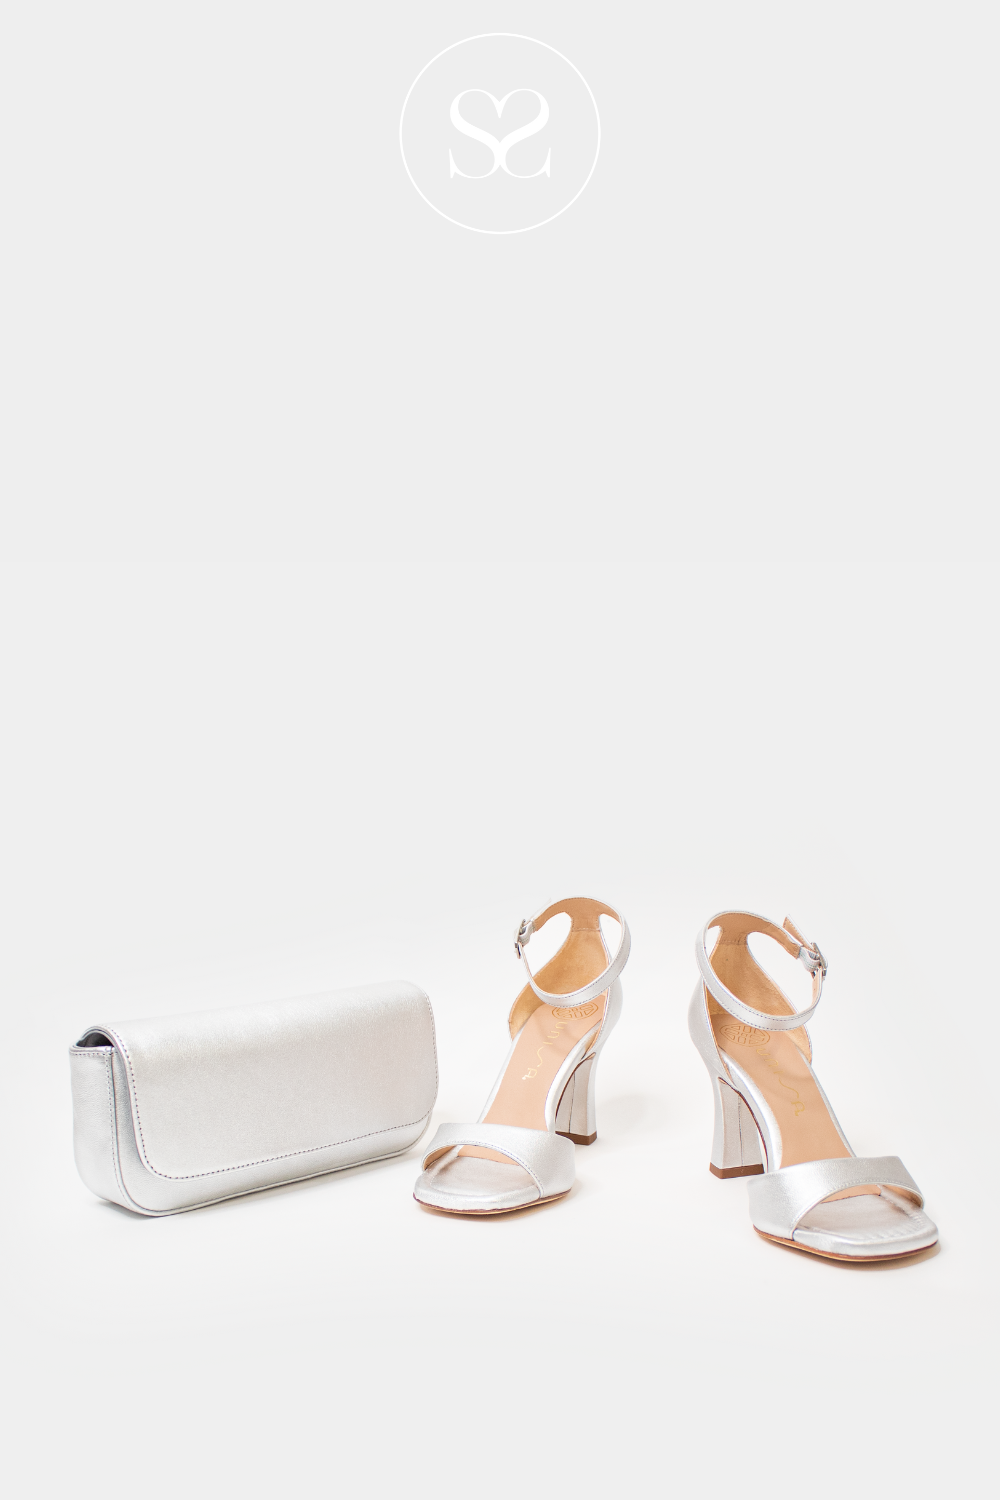 SILVER CLUTCH AND SANDALS FROM UNISA